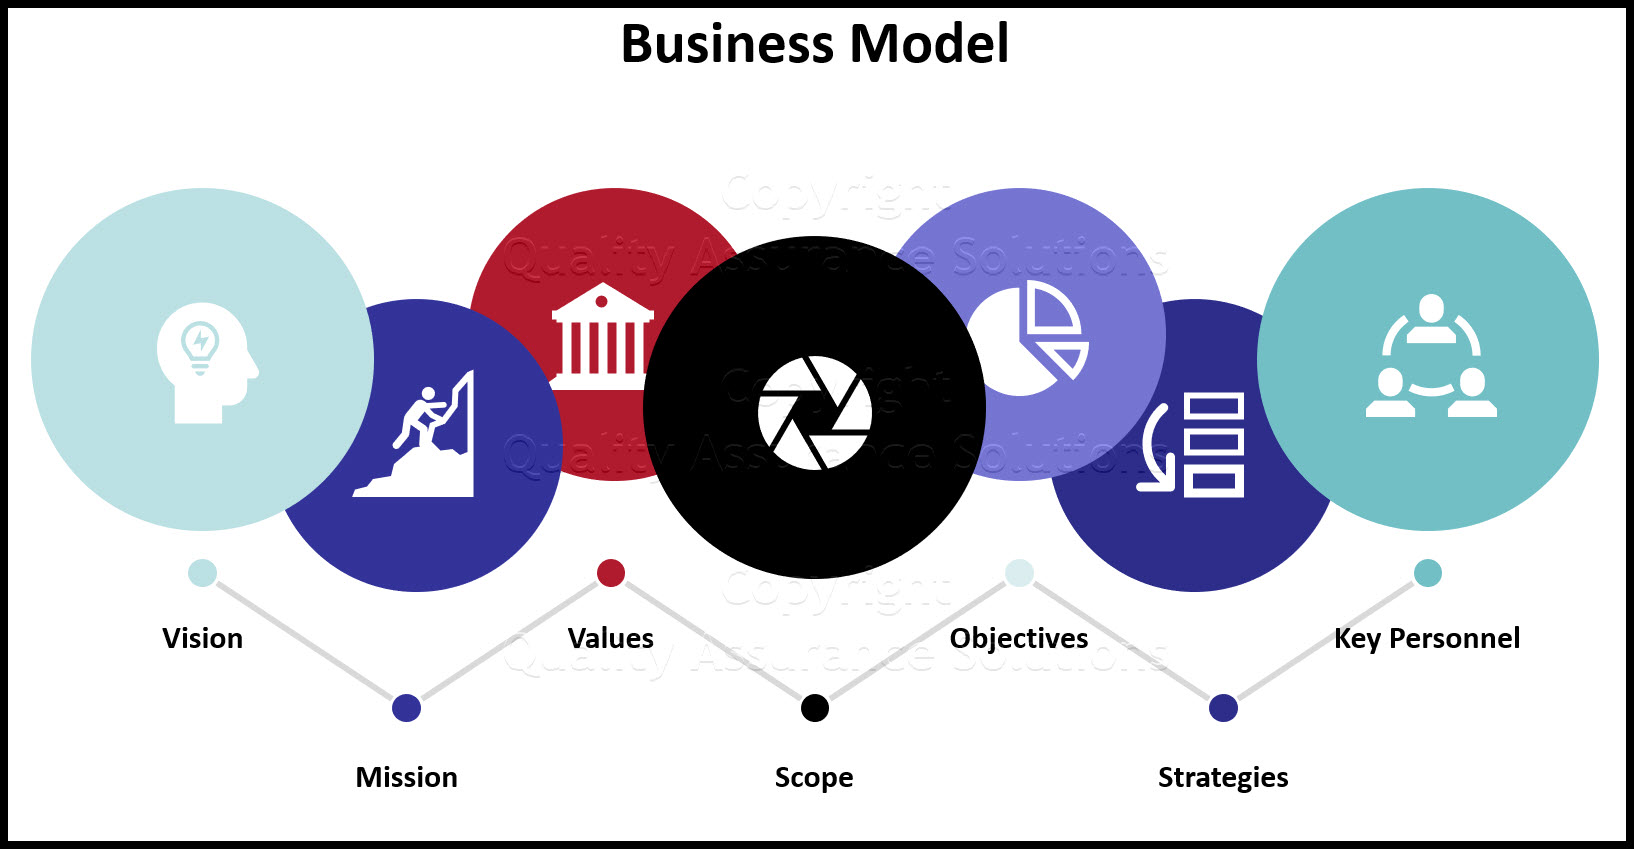 Are you looking for a business model sample? Here is an example of one created for a security business. It covers all the key components you need to create a business model. 